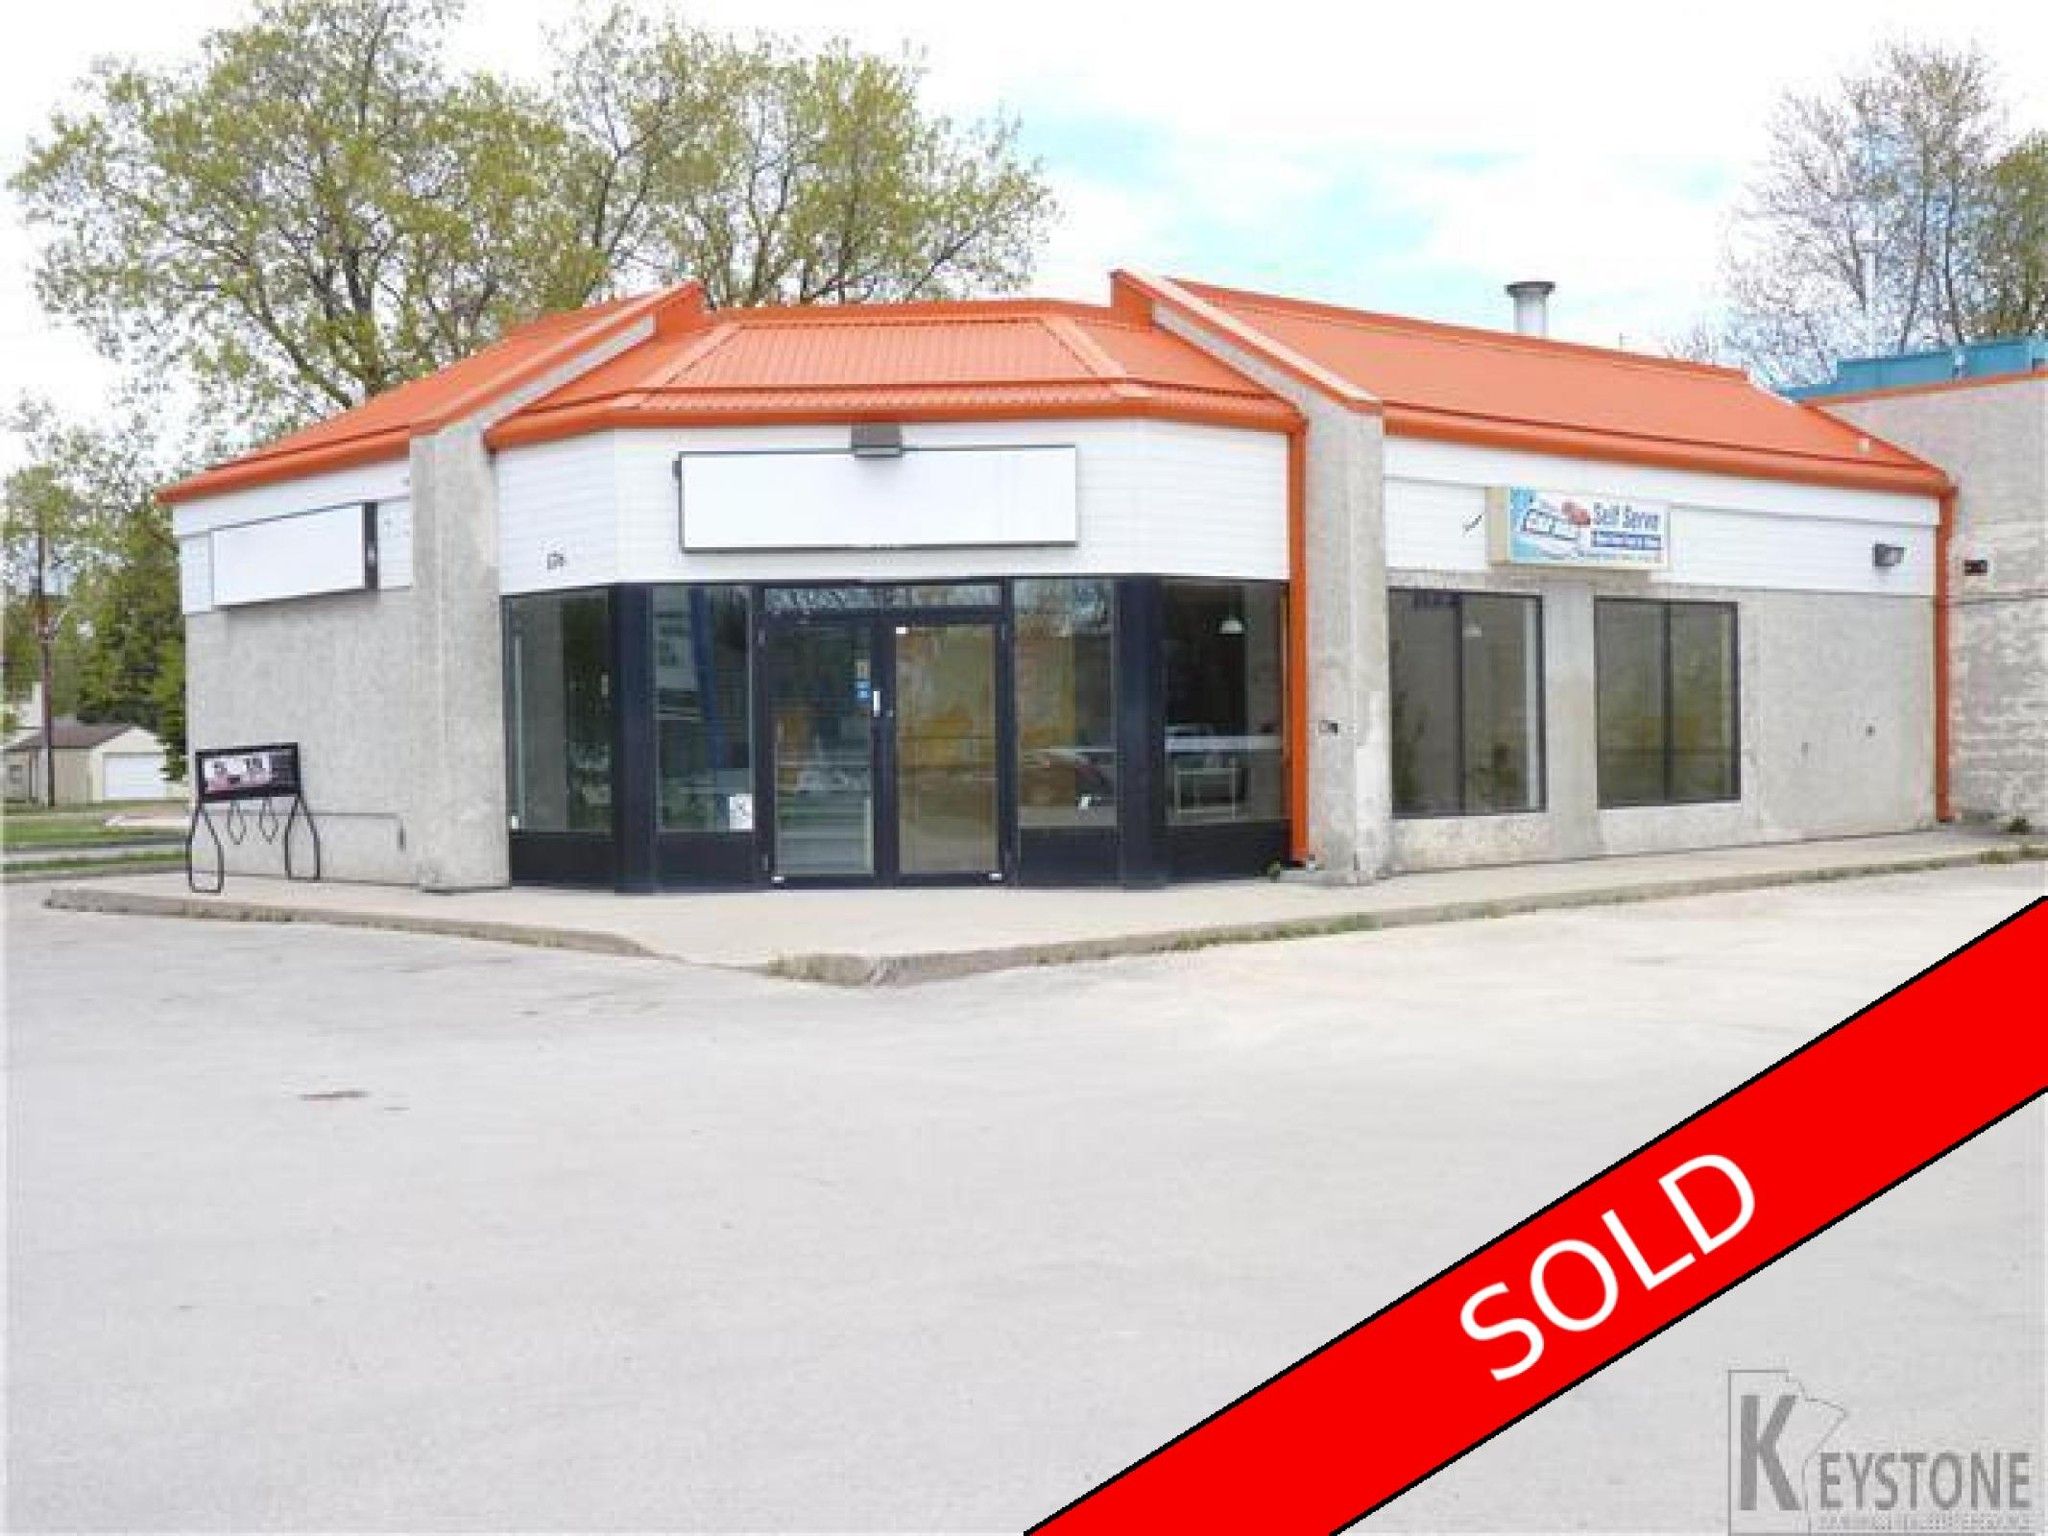 Main Photo: 176 Main Street in Selkirk, MB r1a2s6: Business for sale : MLS®# 1711678